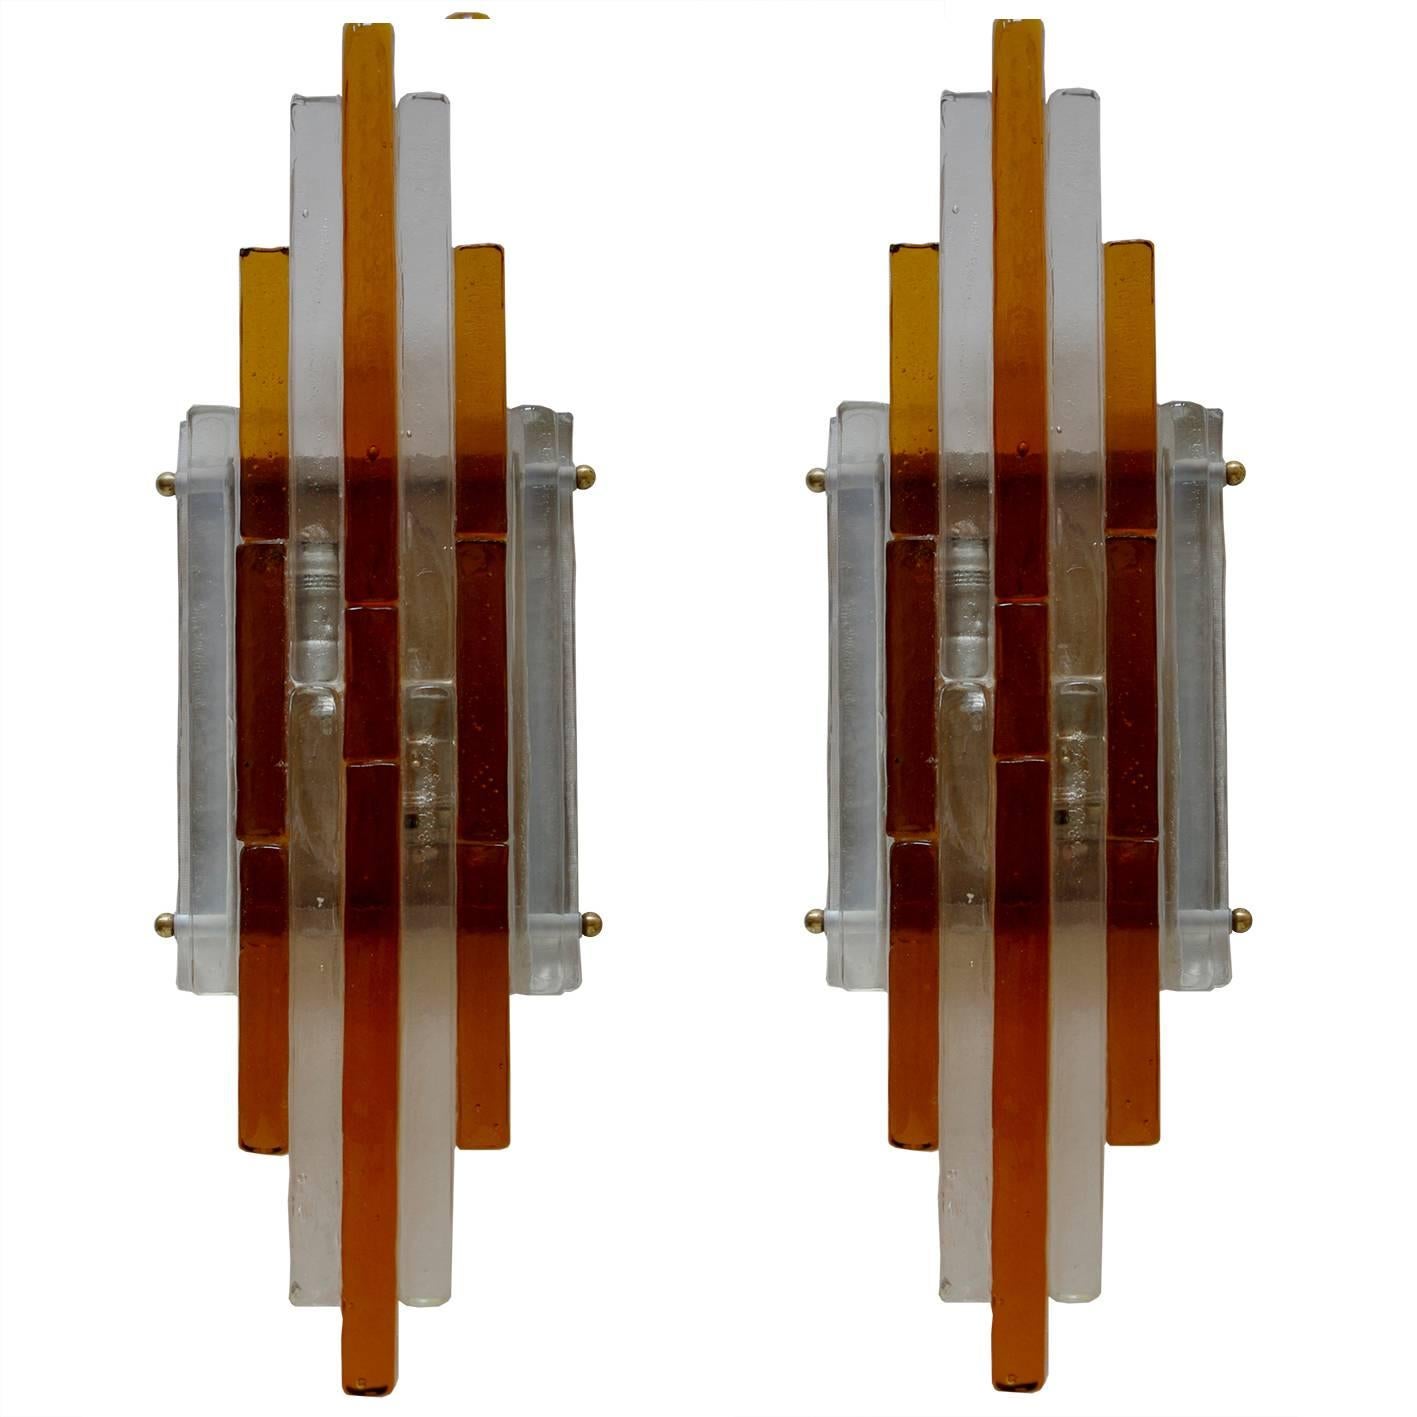 Pair of Large Sculptural Murano Glass Wall Flush Mounts Sconcesby Poliarte 1960s